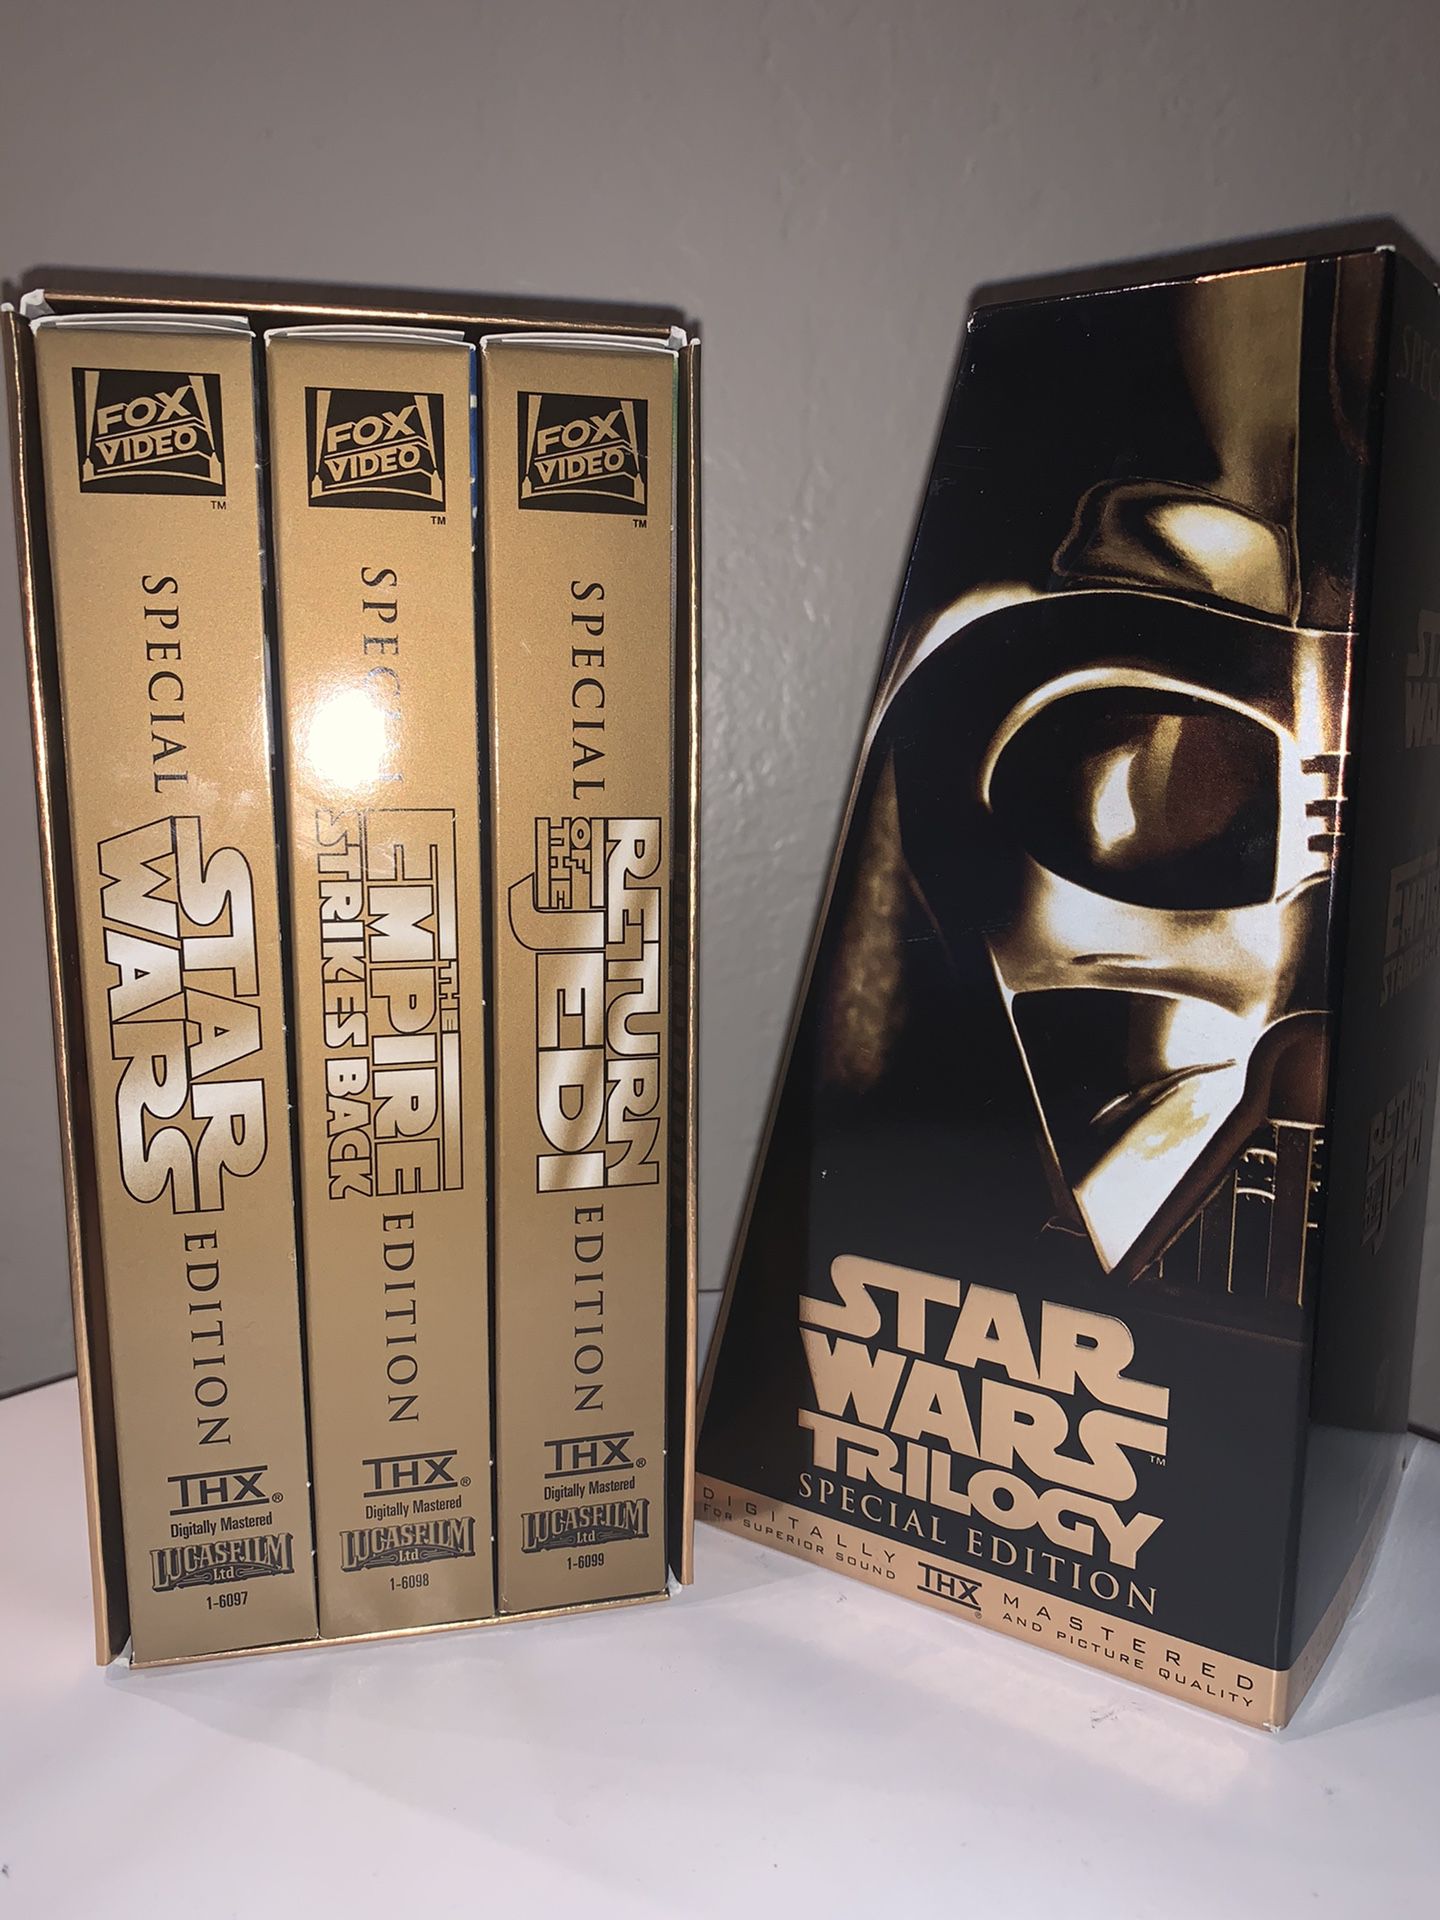 Star Wars Trilogy Special Edition VHS 1997